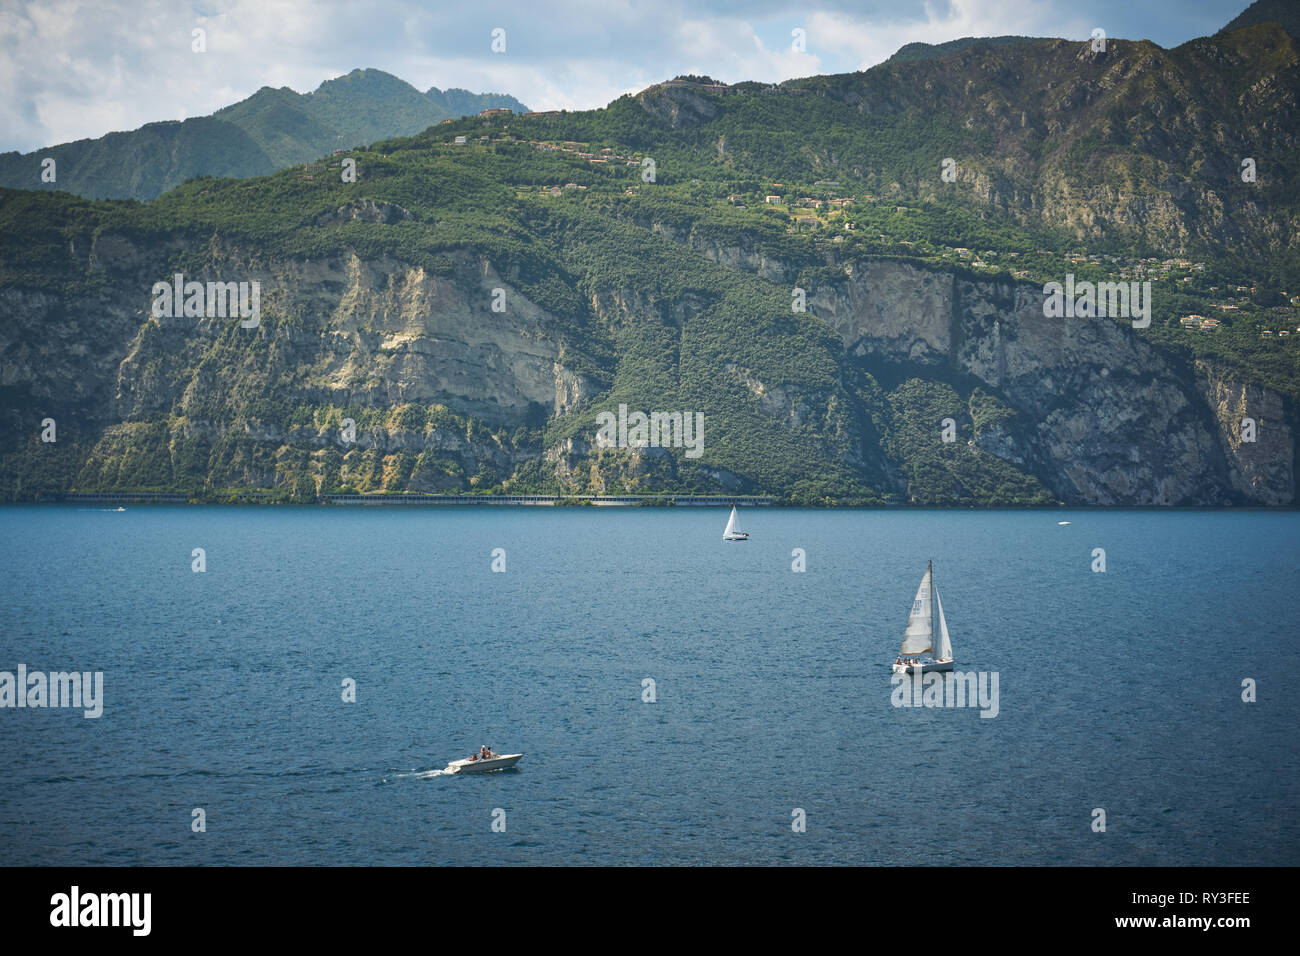 Malcesine, Italy - August, 2018. Sailboats on the lake Garda, the biggest Italian lake, near the town of Malcesine. Stock Photo